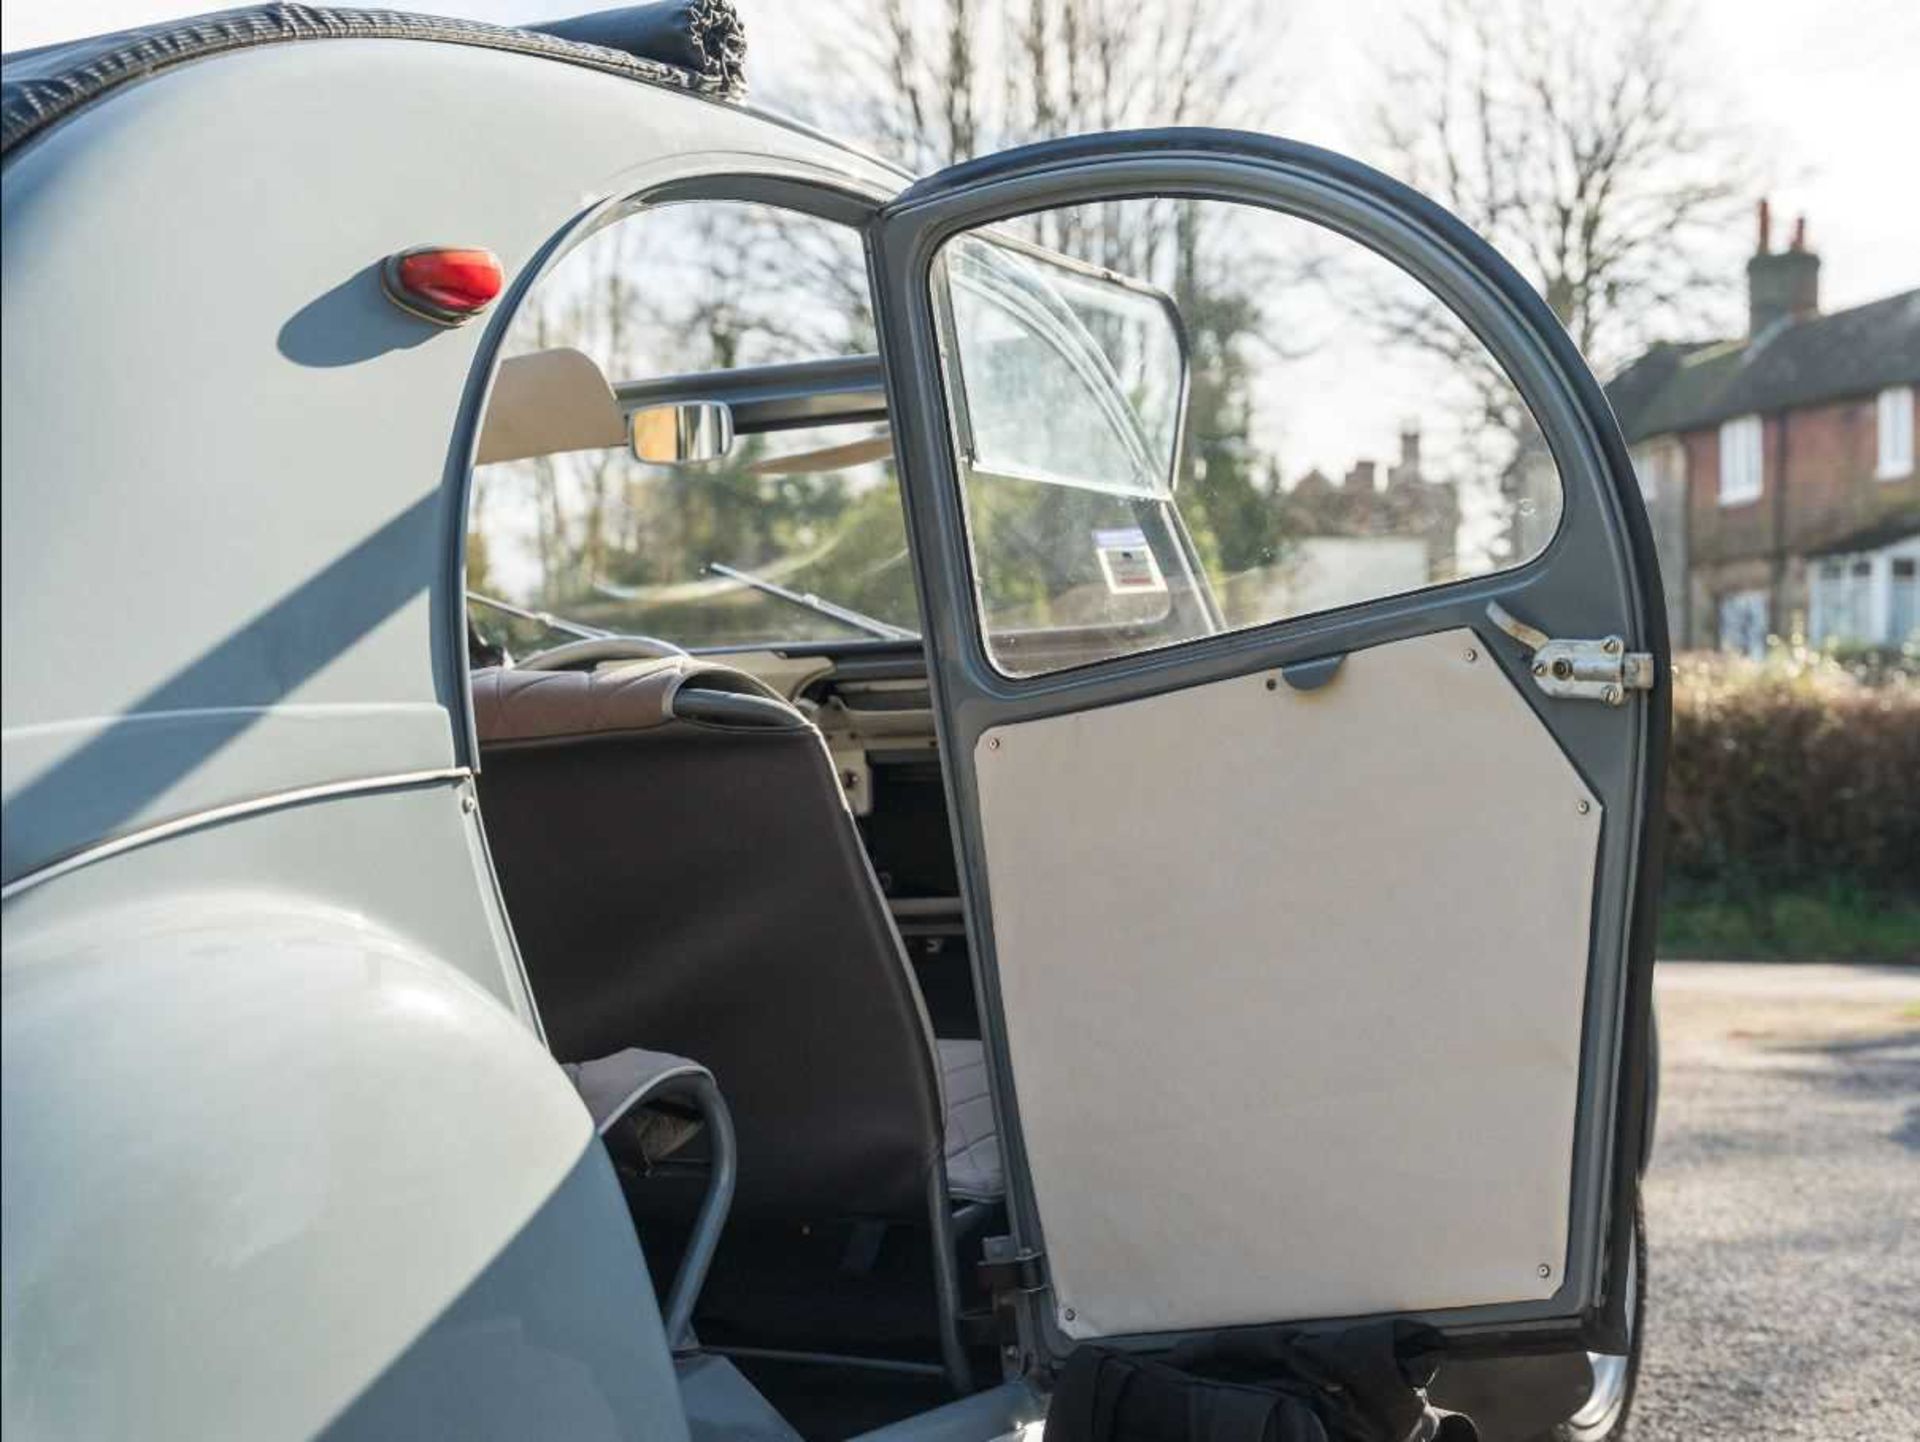 1958 Citroën 2CV AZL A rare, early example, with sought-after 'ripple bonnet' - Image 20 of 77